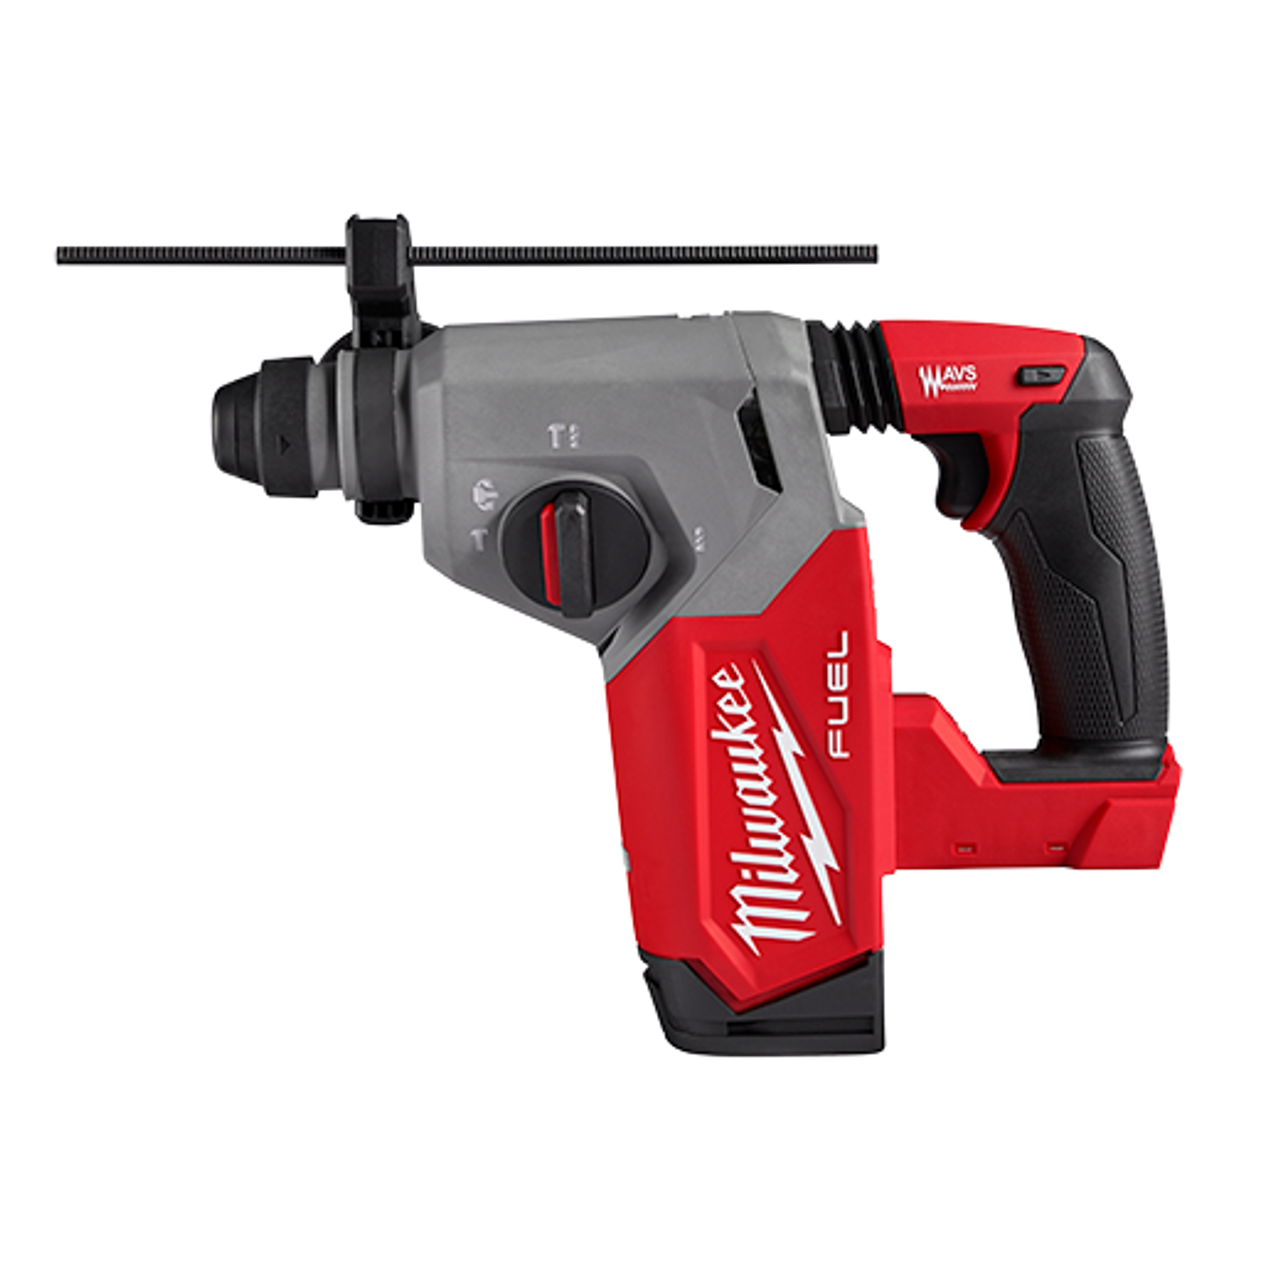 M18 FUEL 1" SDS Plus Rotary Hammer